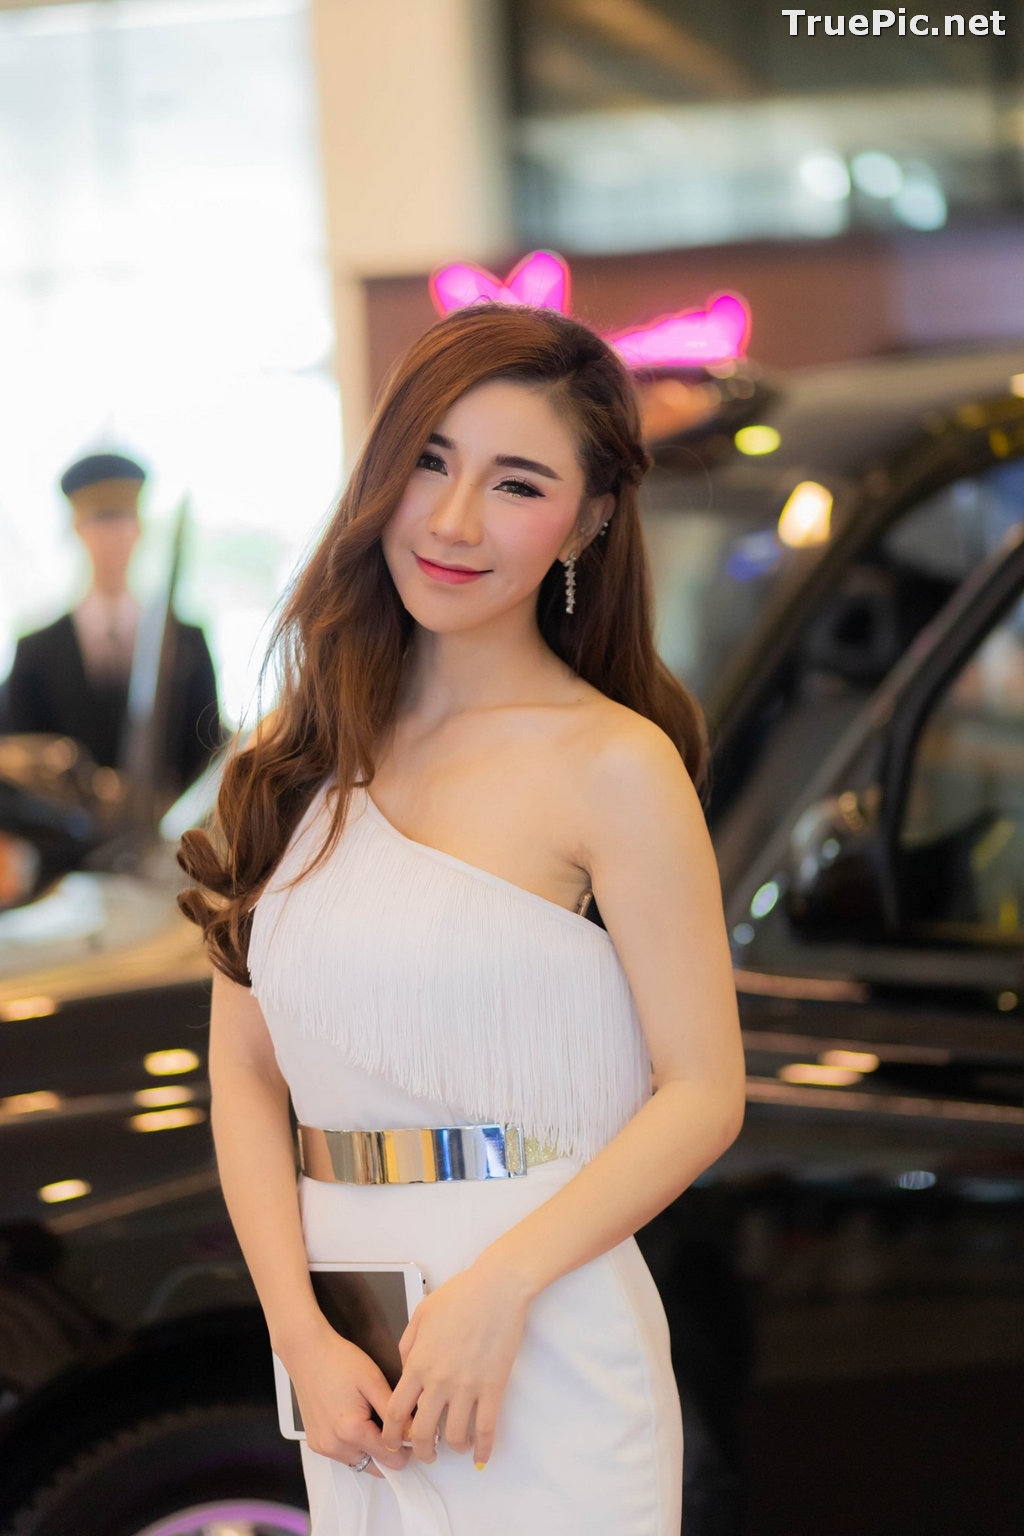 Image Thailand Racing Model at BIG Motor Sale 2019 - TruePic.net - Picture-30